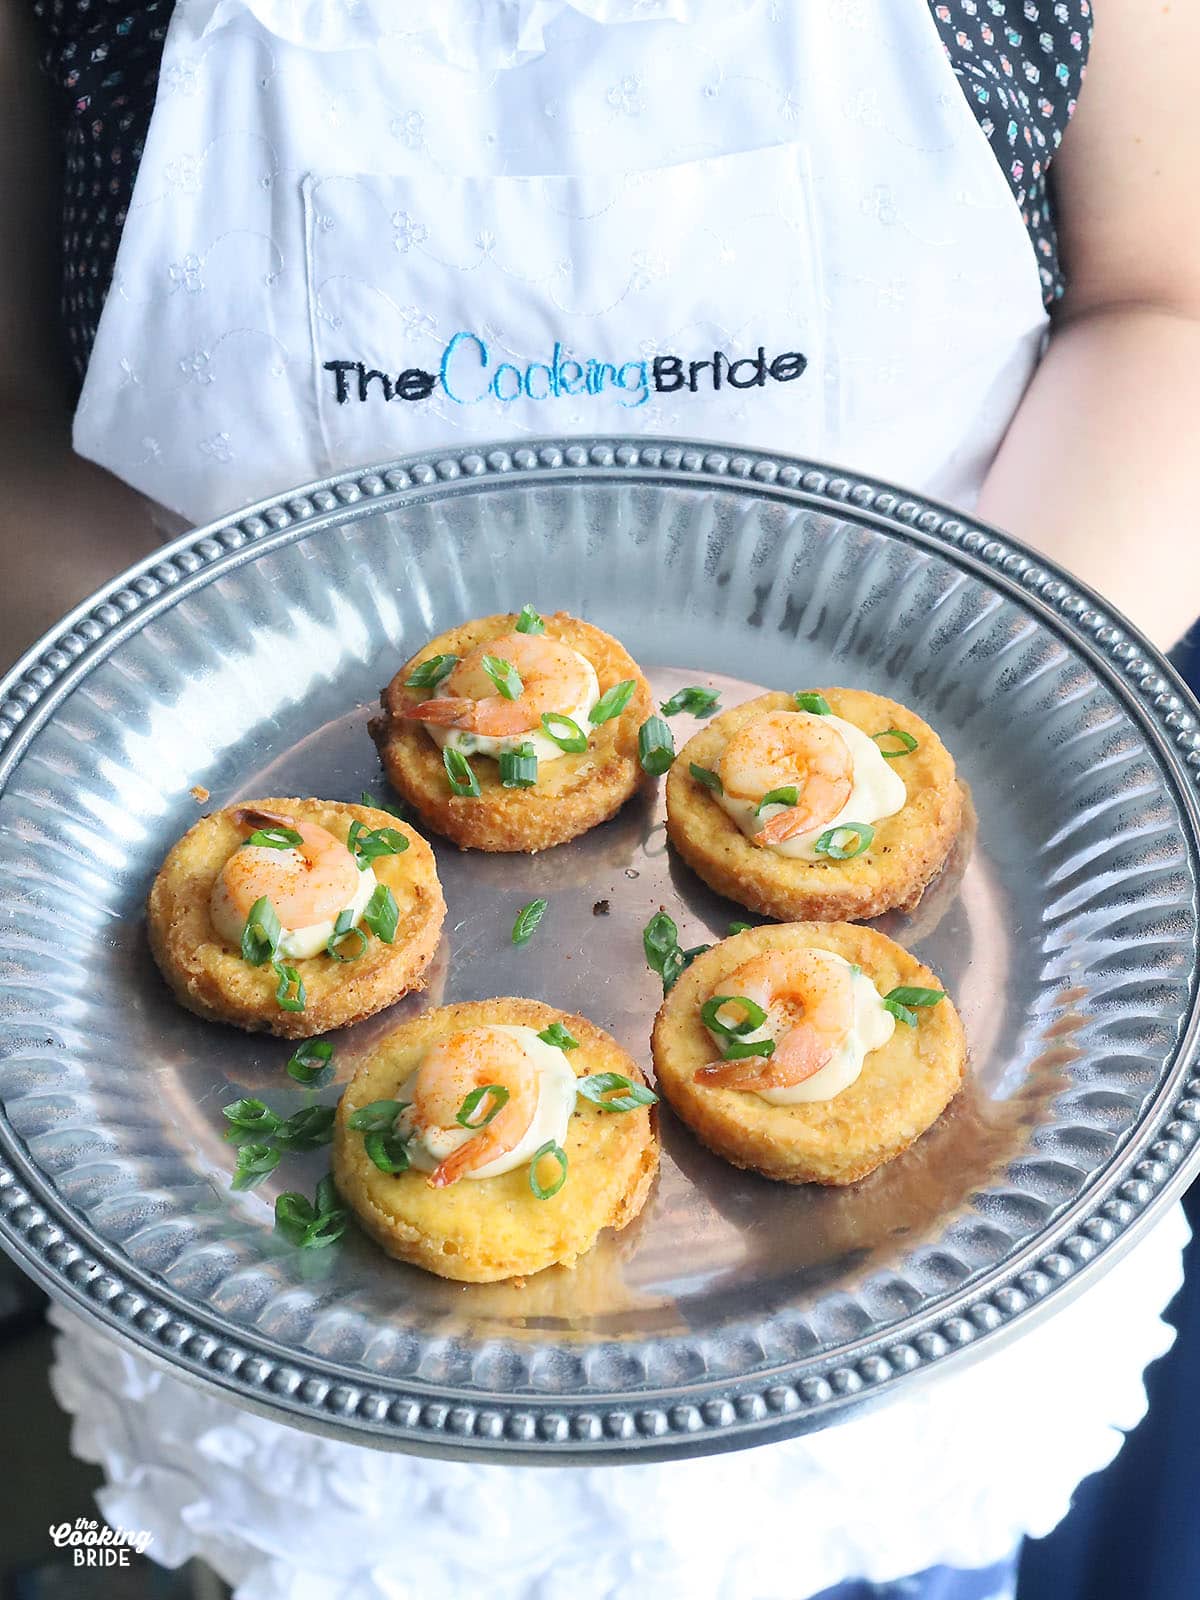 person holding a pewter platter of five shrimp on fried grit cakes garnished with green onions